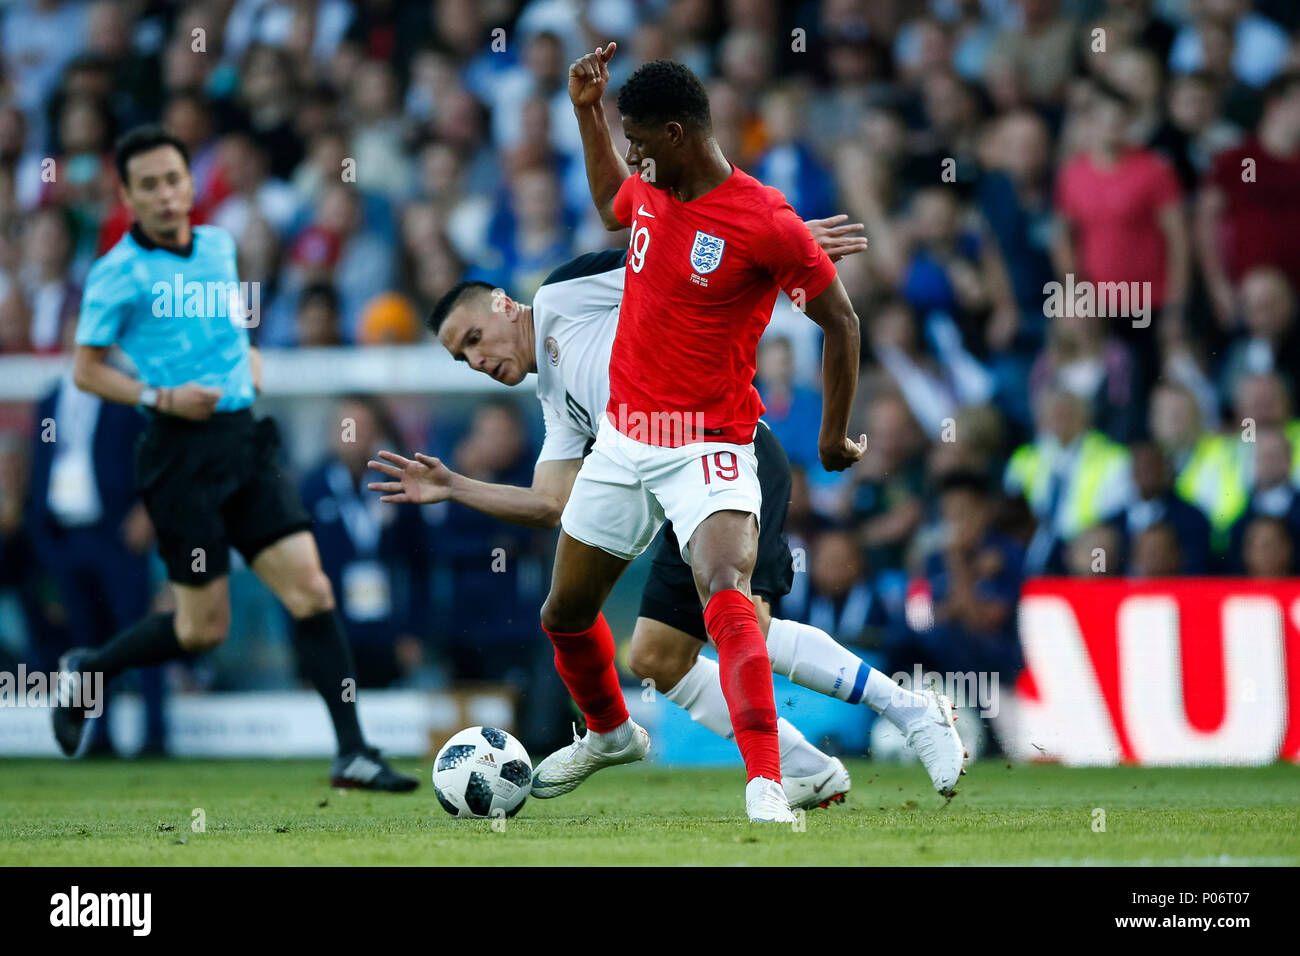 Leeds, UK. 7th Jun, 2018. David Guzman of Costa Rica and Marcus Rashford of England during the International Friendly match between England and Costa Rica at Elland Road on June 7th 2018 in Leeds, England. (Photo by Daniel Chesterton/phcimages.com) Credit: PHC Images/Alamy Live News Stock Photo